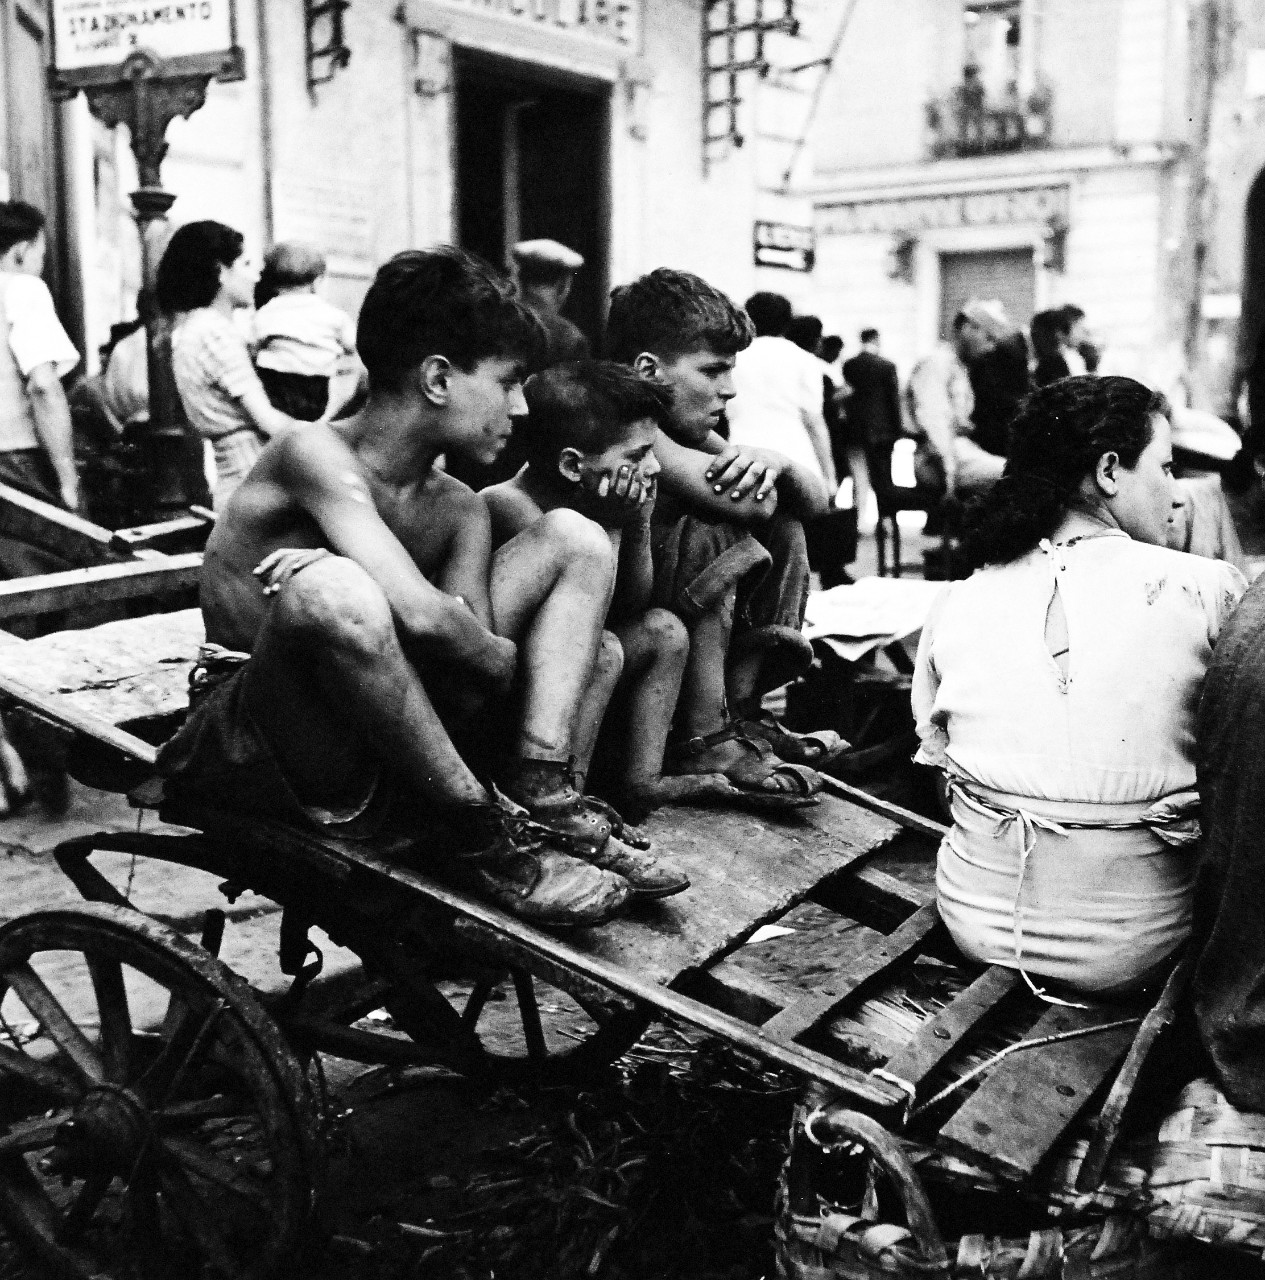 80-G-474133:   Naples, Italy, August 1944.   Children in Naples, Italy.   Boys on cart.  Steichen Photograph Unit:  Photographed by Lieutenant Wayne Miller, August 1944.  TR-11320.  Official  U.S. Navy Photograph, now in the collections of the National Archives. (2015/12/08). 